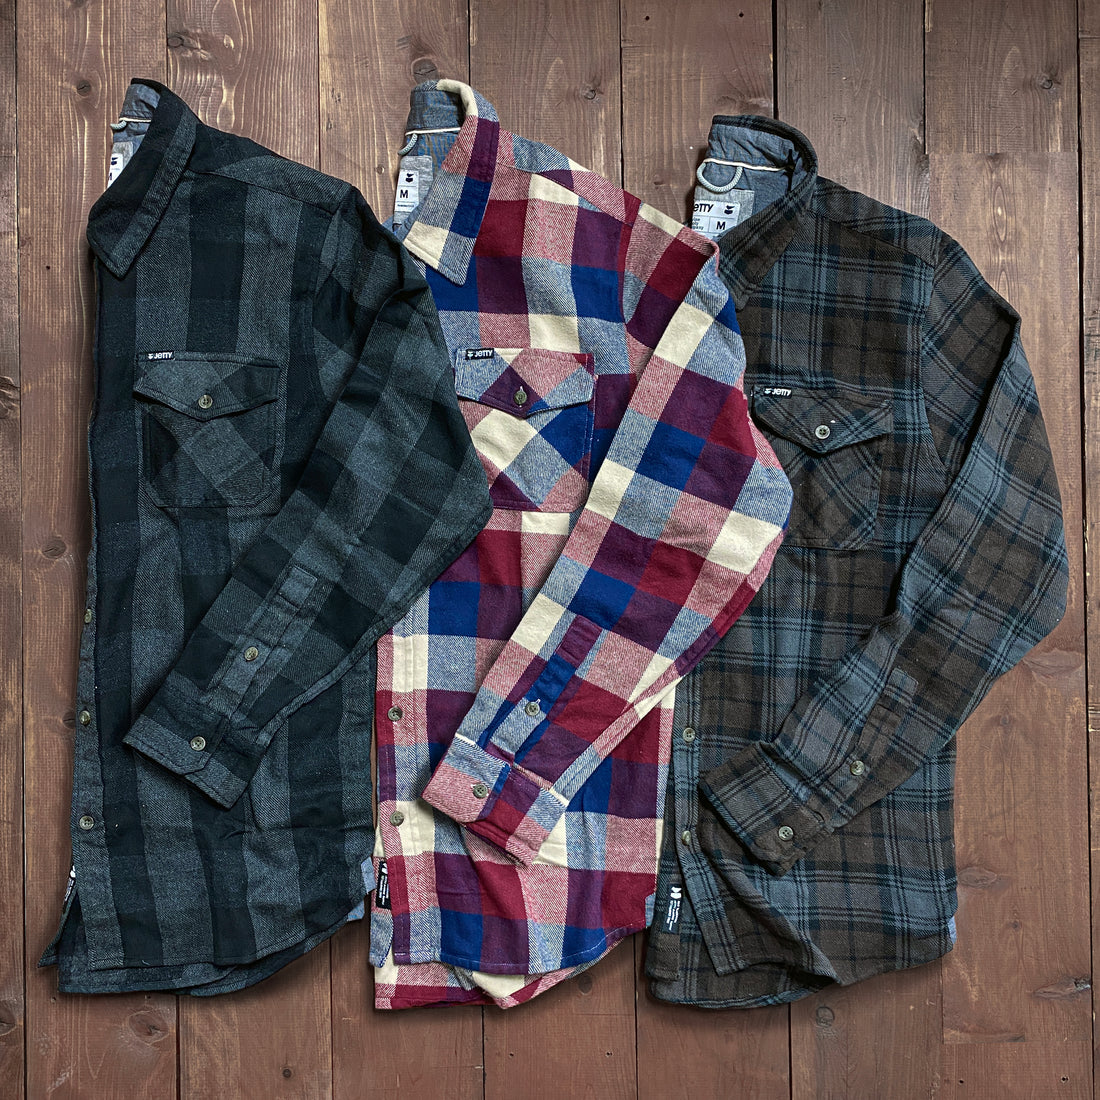 New Arbor Flannels!